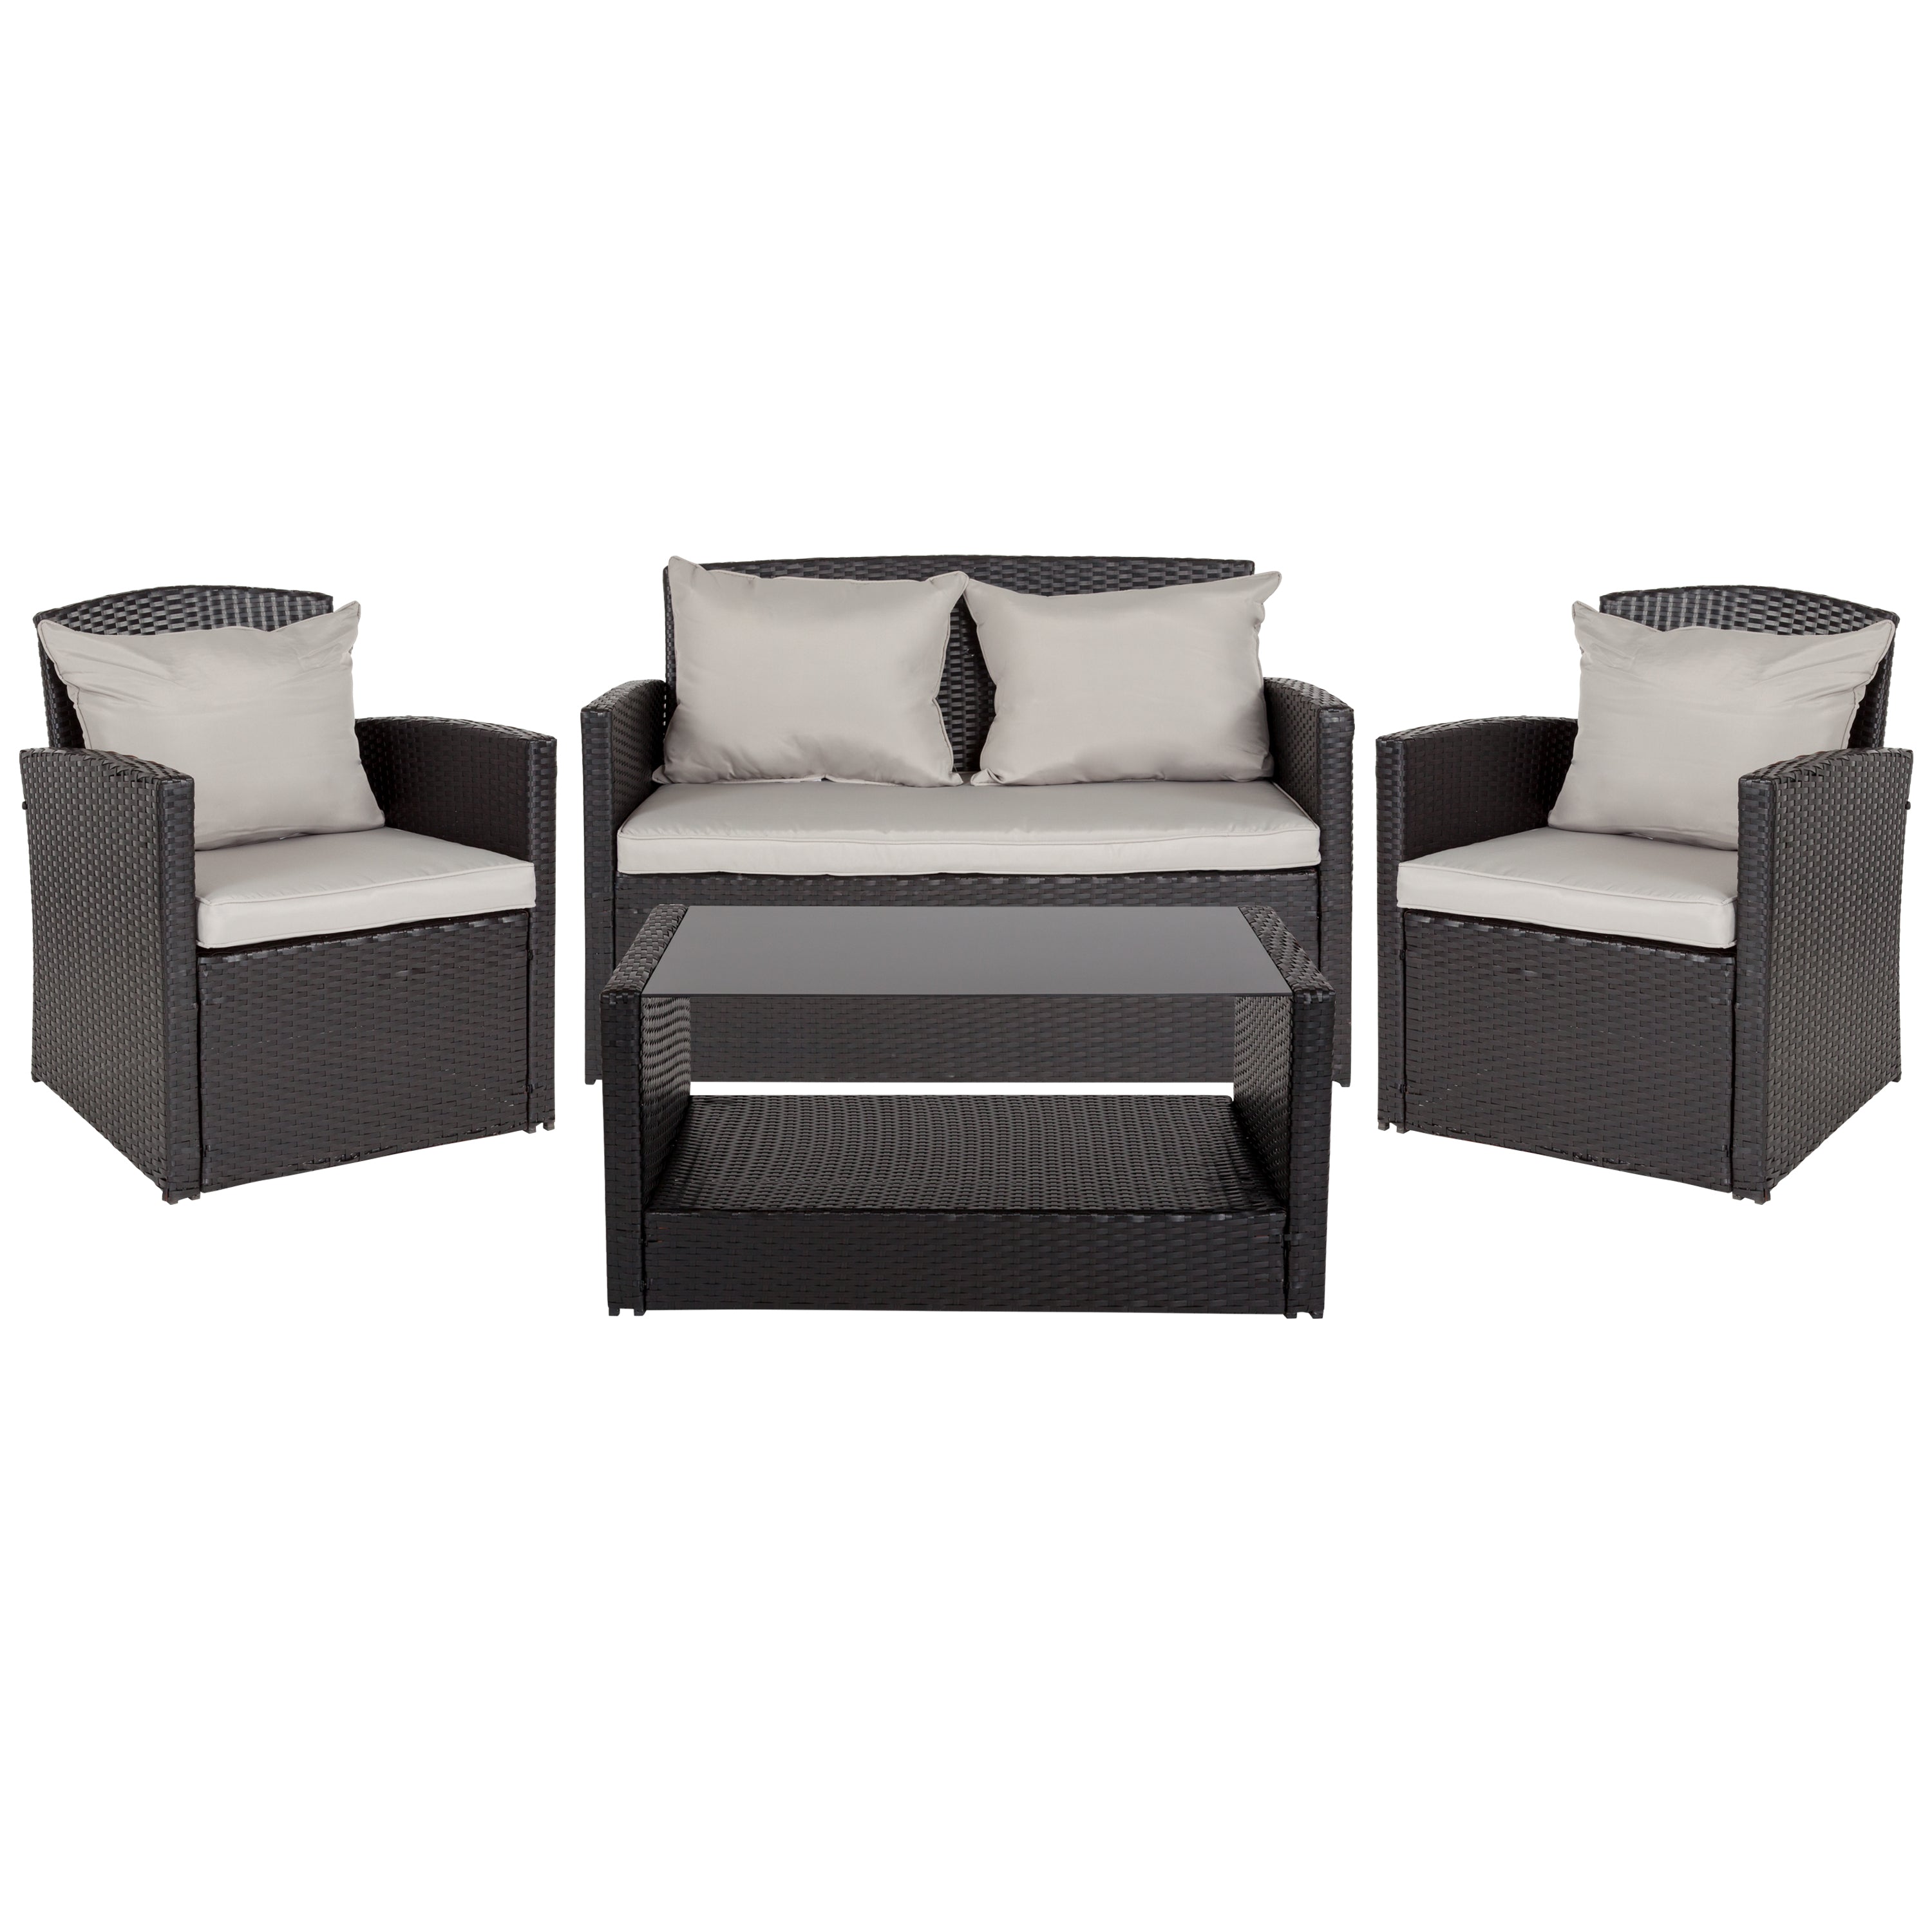 Aransas Series 4 Piece Patio Set with Back Pillows and Seat Cushions-Outdoor Set-Flash Furniture-Wall2Wall Furnishings